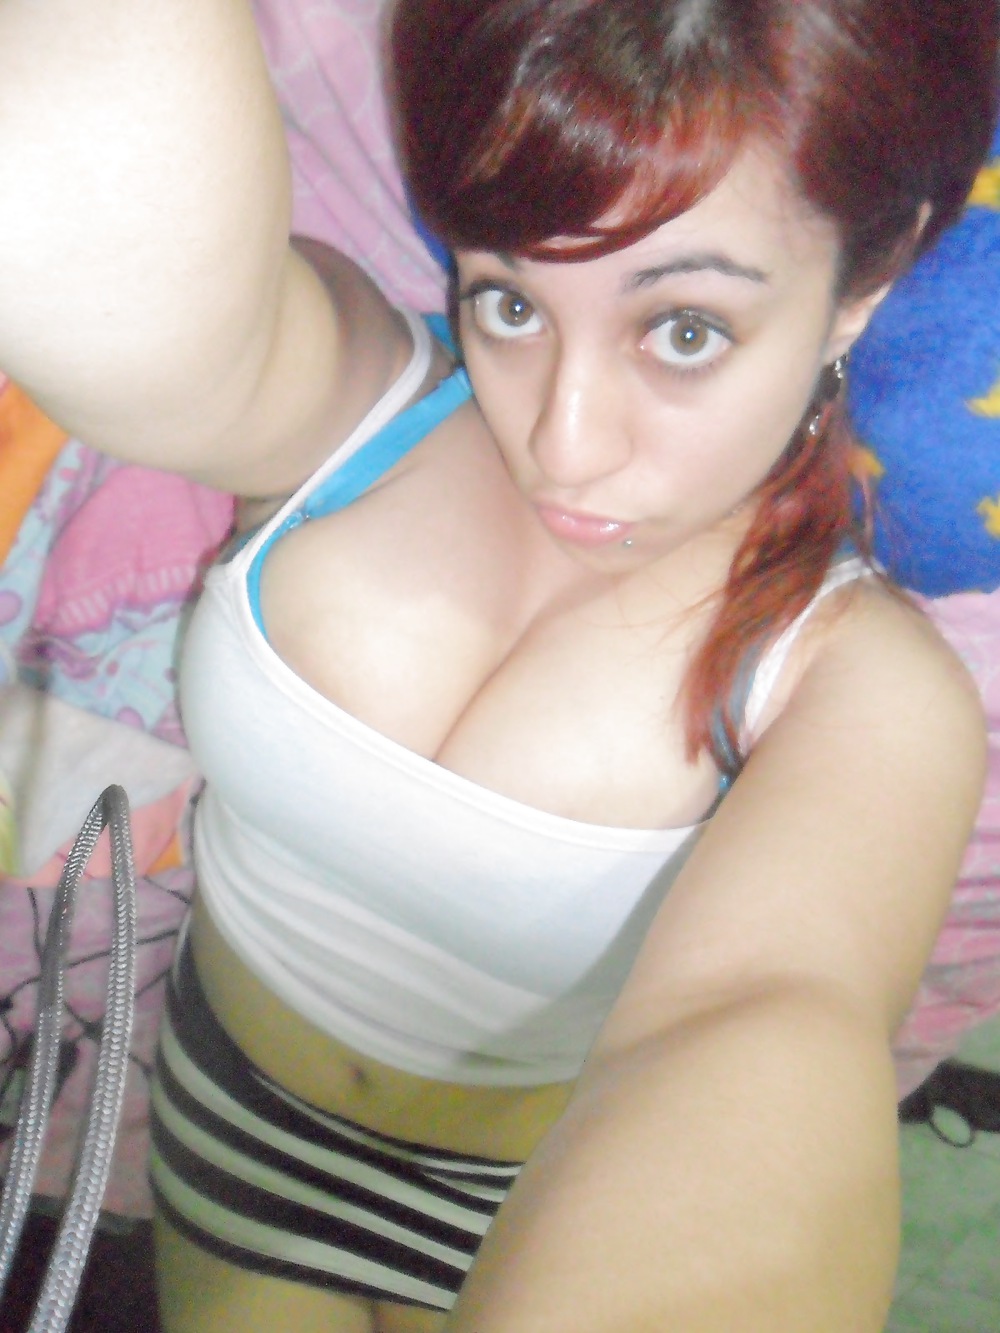 Teens from Argentina 5 adult photos